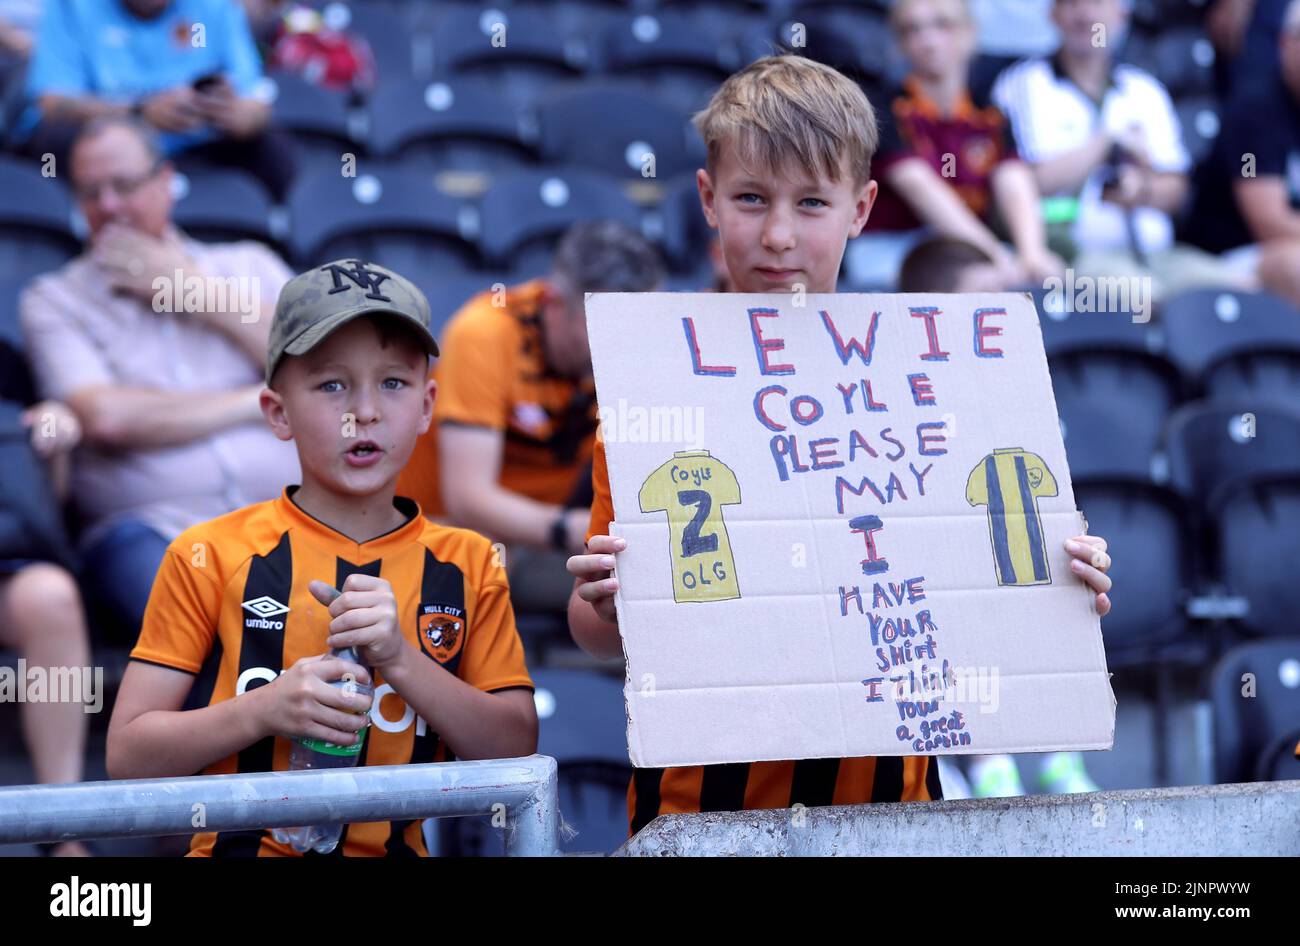 A young Hull City fan in the stands with a sign asking for the shirt of Lewis Coyle during the Sky Bet Championship match at the MKM Stadium, Hull. Picture date: Saturday August 13, 2022. Stock Photo